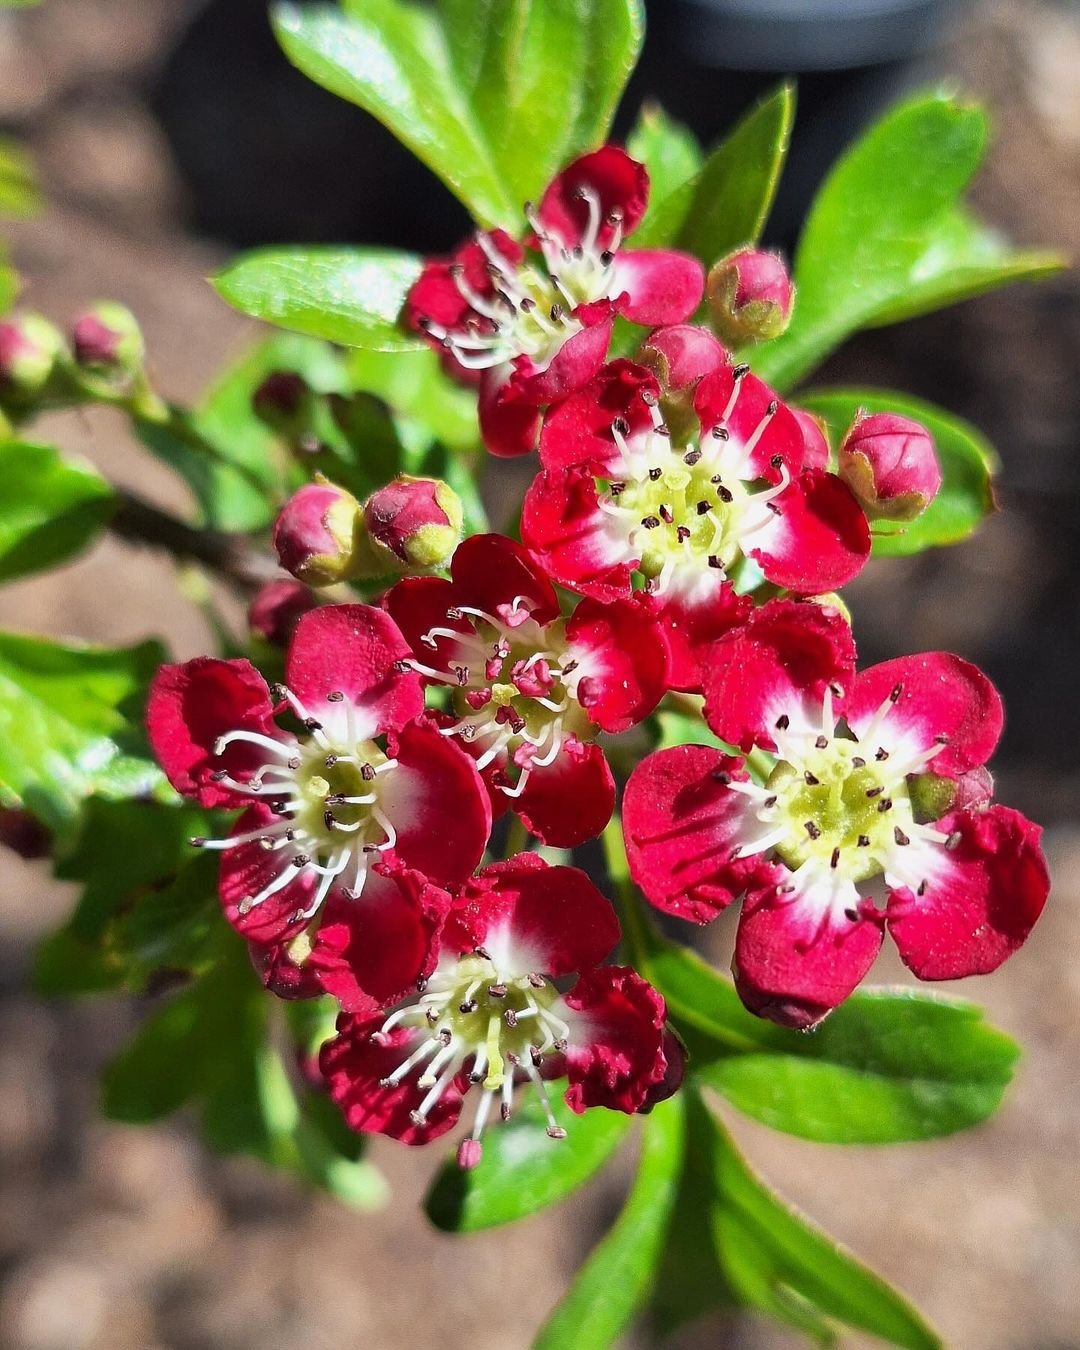 Red hawthorn flower with white centers blooming on a plant.